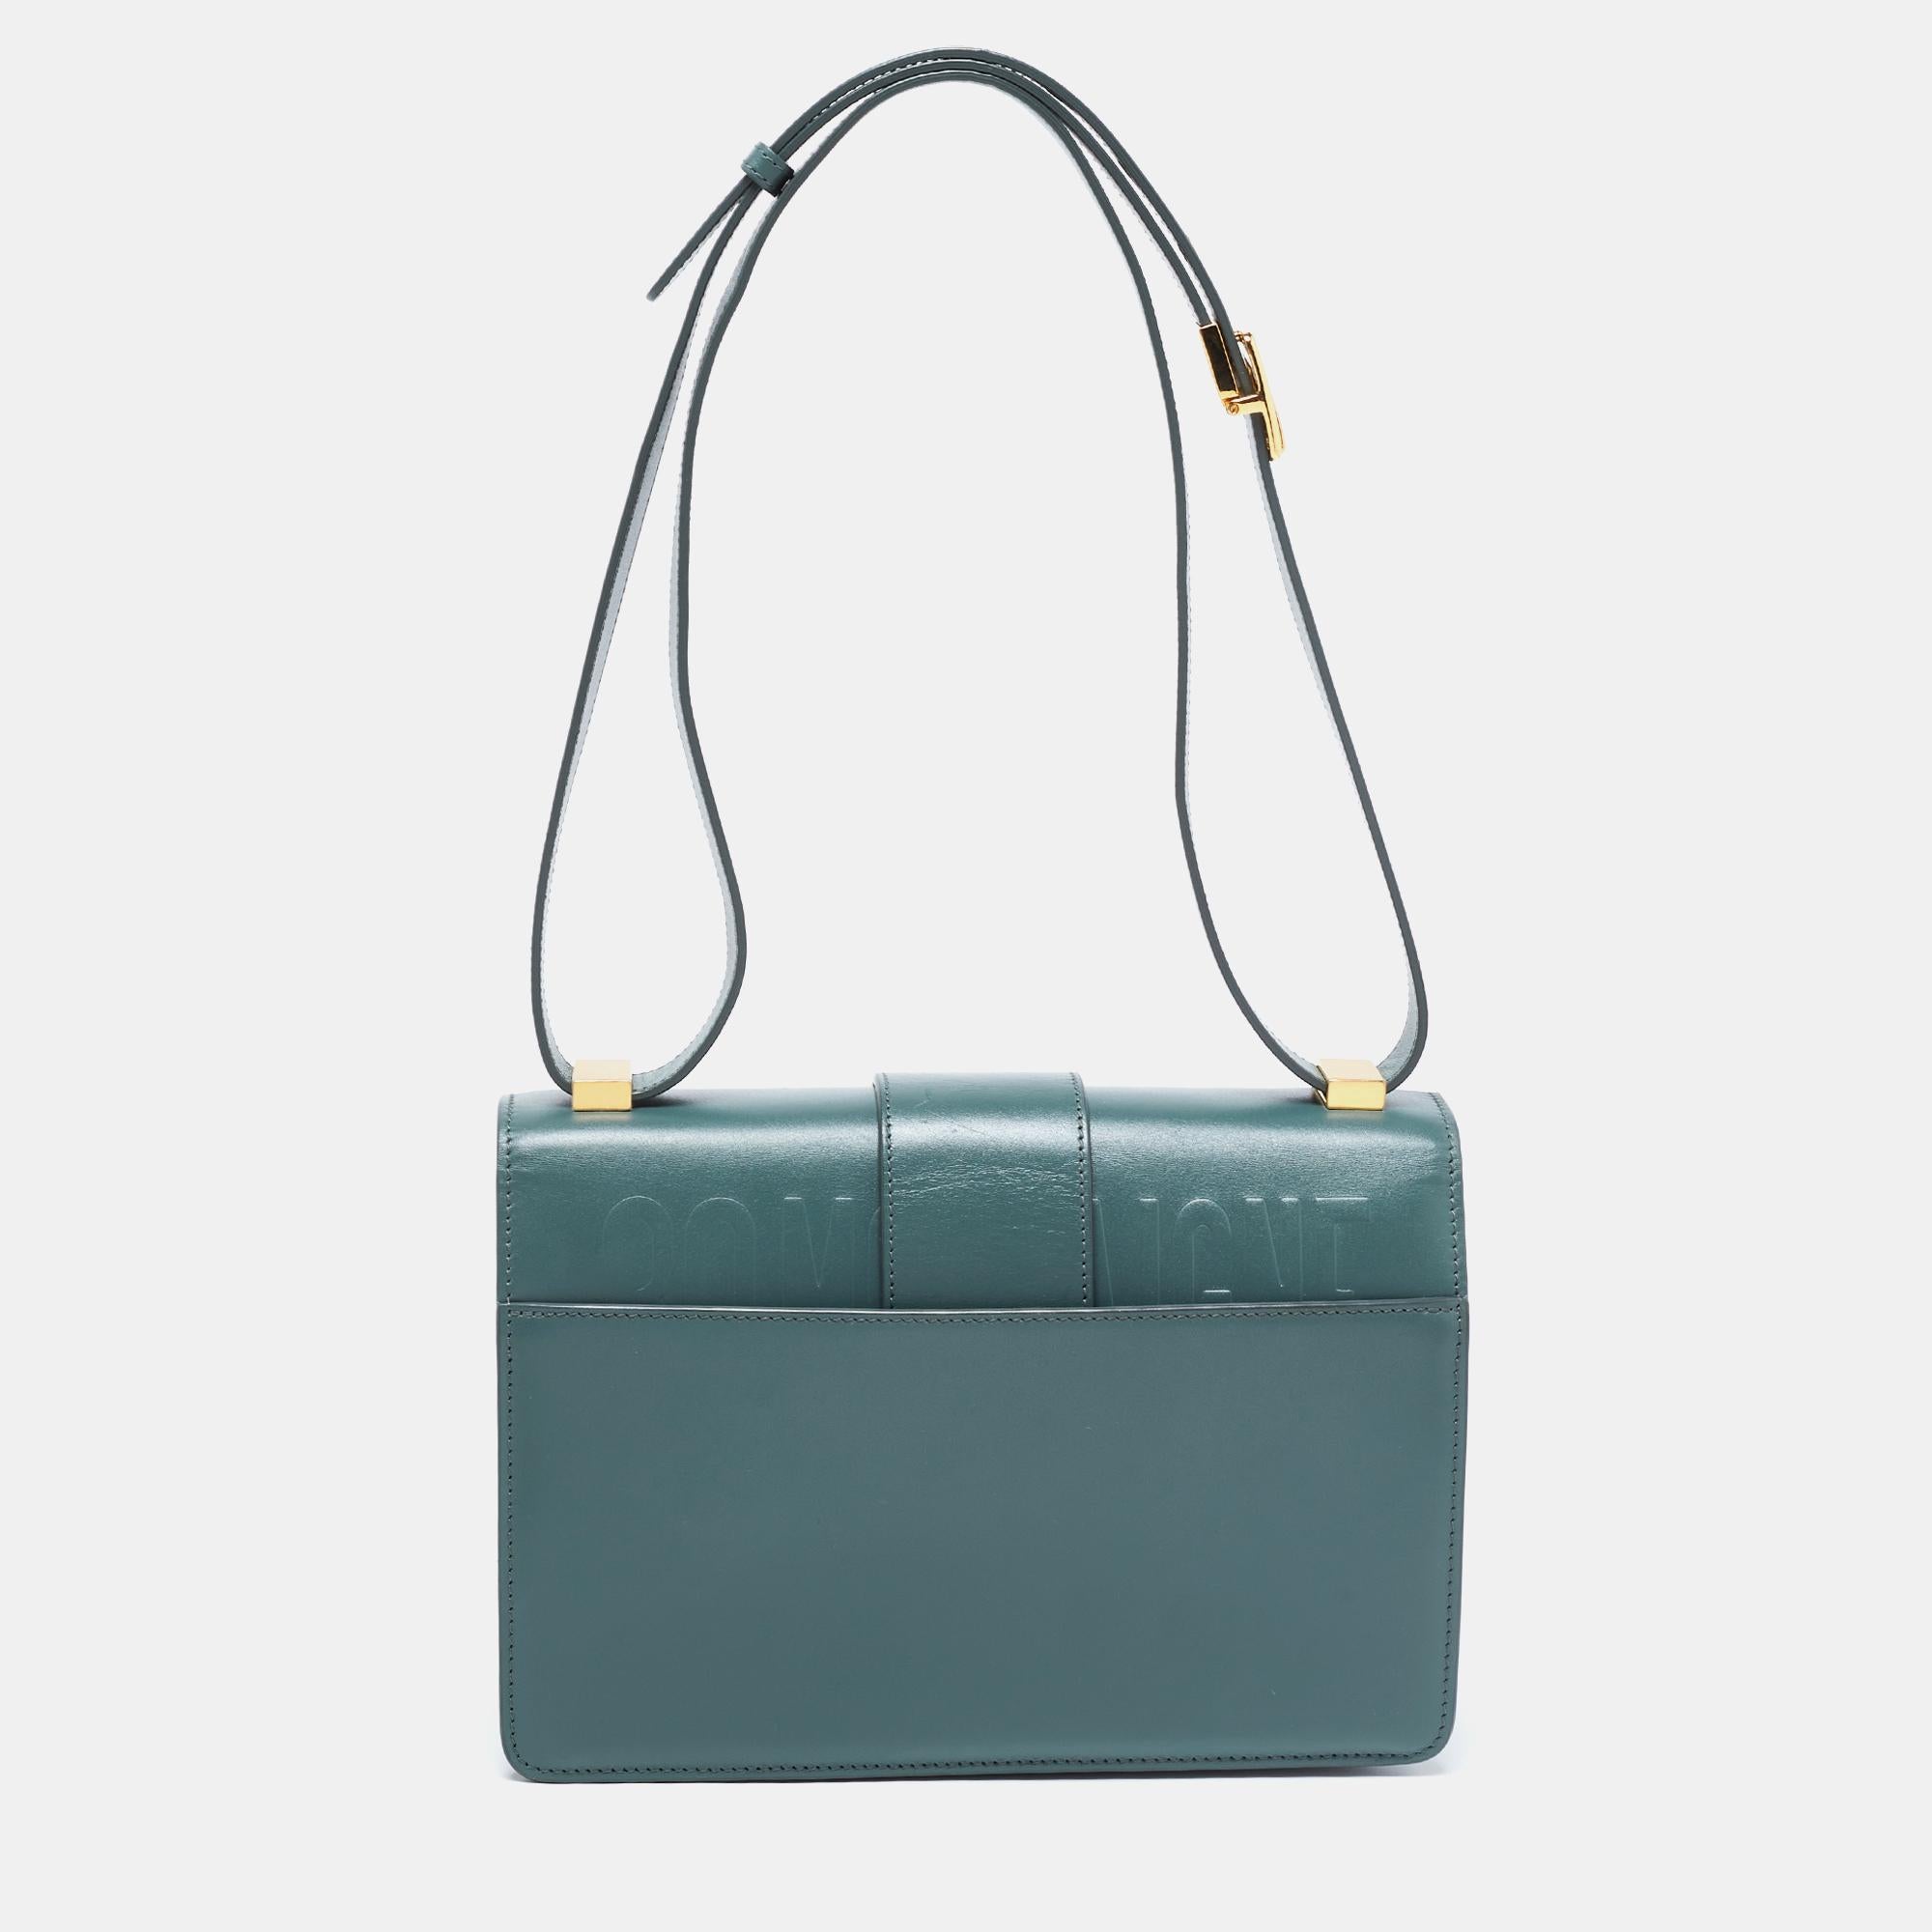 One of the most emblematic creations of the House of Dior is this gorgeous 30 Montaigne shoulder bag. Embellished with the signature CD accent on the front and crafted using green leather, this bag provides us with a neat leather interior and a